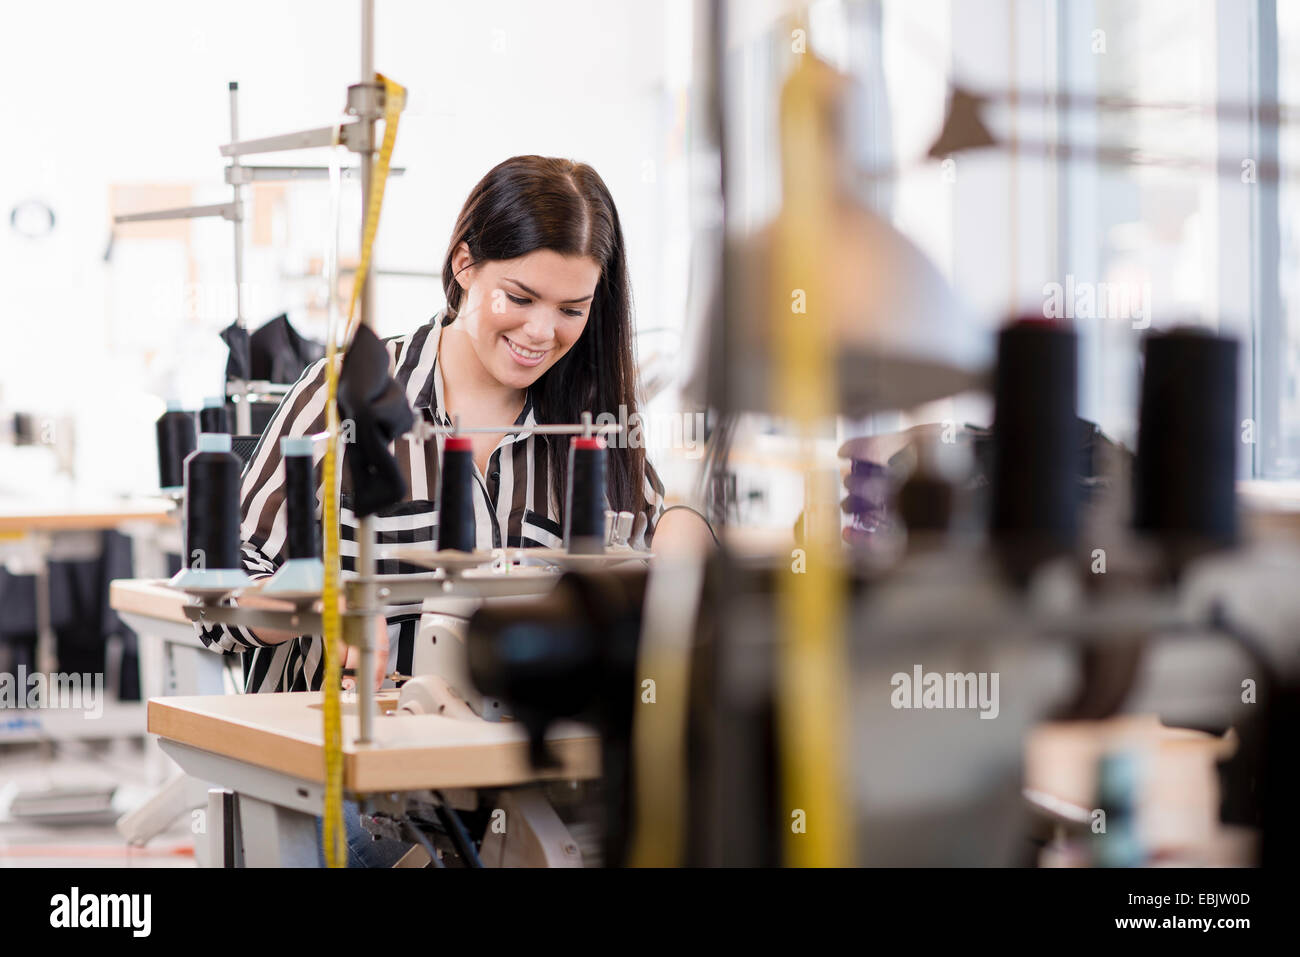 Young female seamstress using sewing machine in workshop Stock Photo